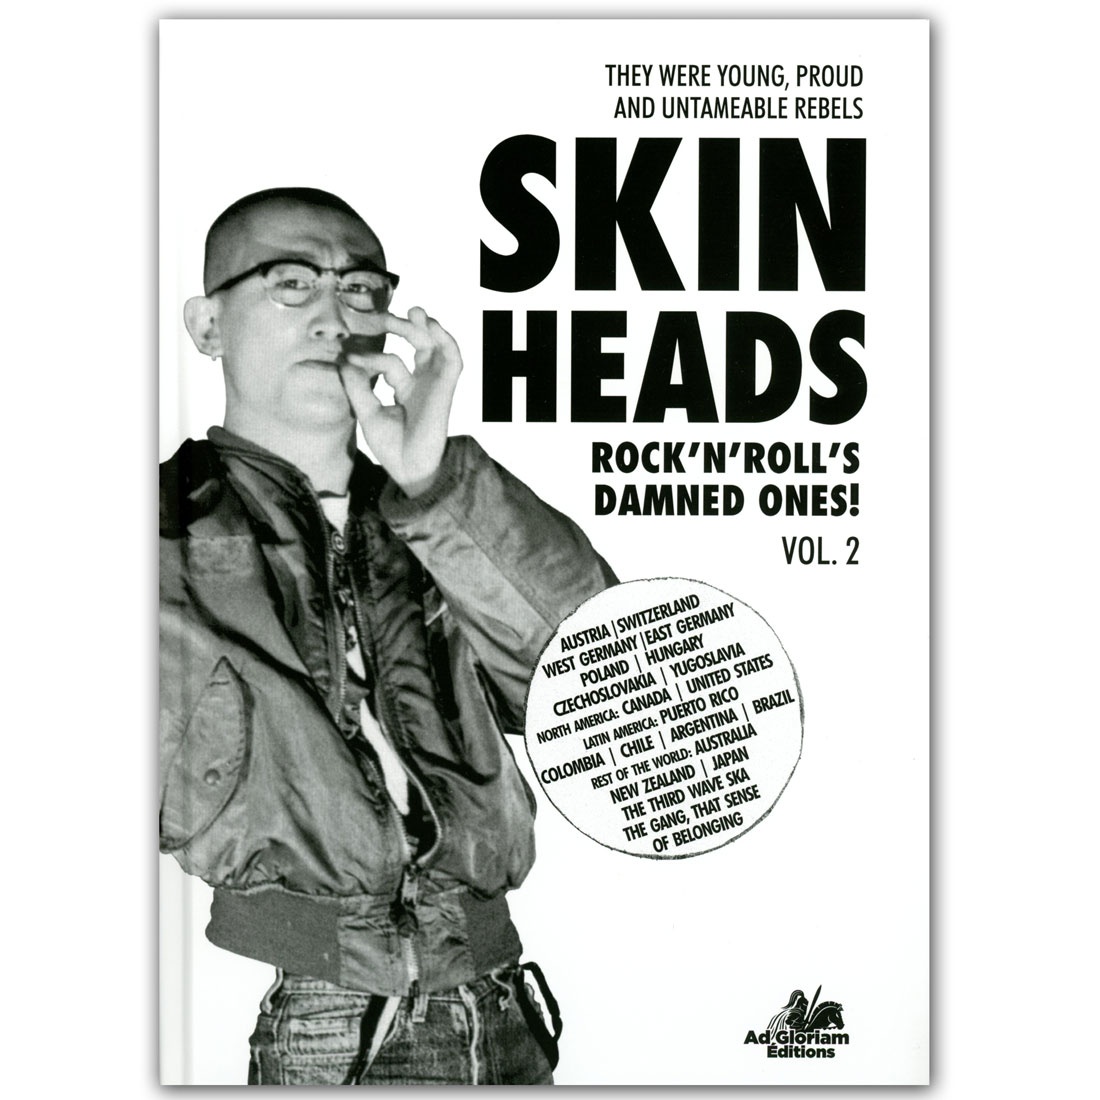 Picture of the cover of SKINHEADS Rock n Rolls Damned Ones! Vol. 2